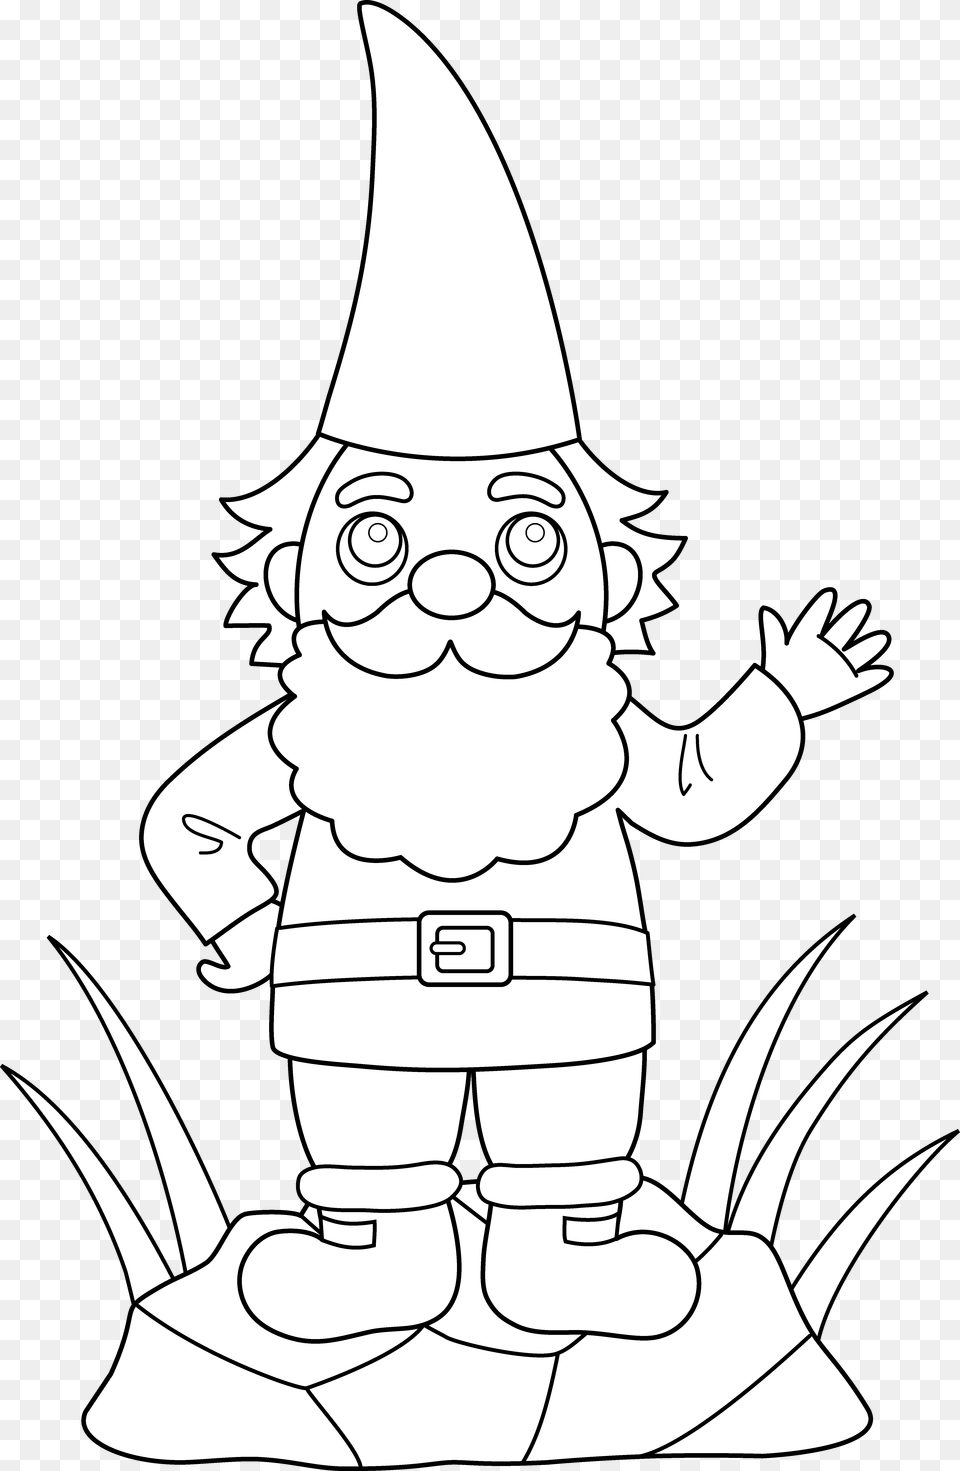 Collection Of Gnome Drawing Family On Coloring Book, Comics, Publication, Cartoon, Animal Free Png Download